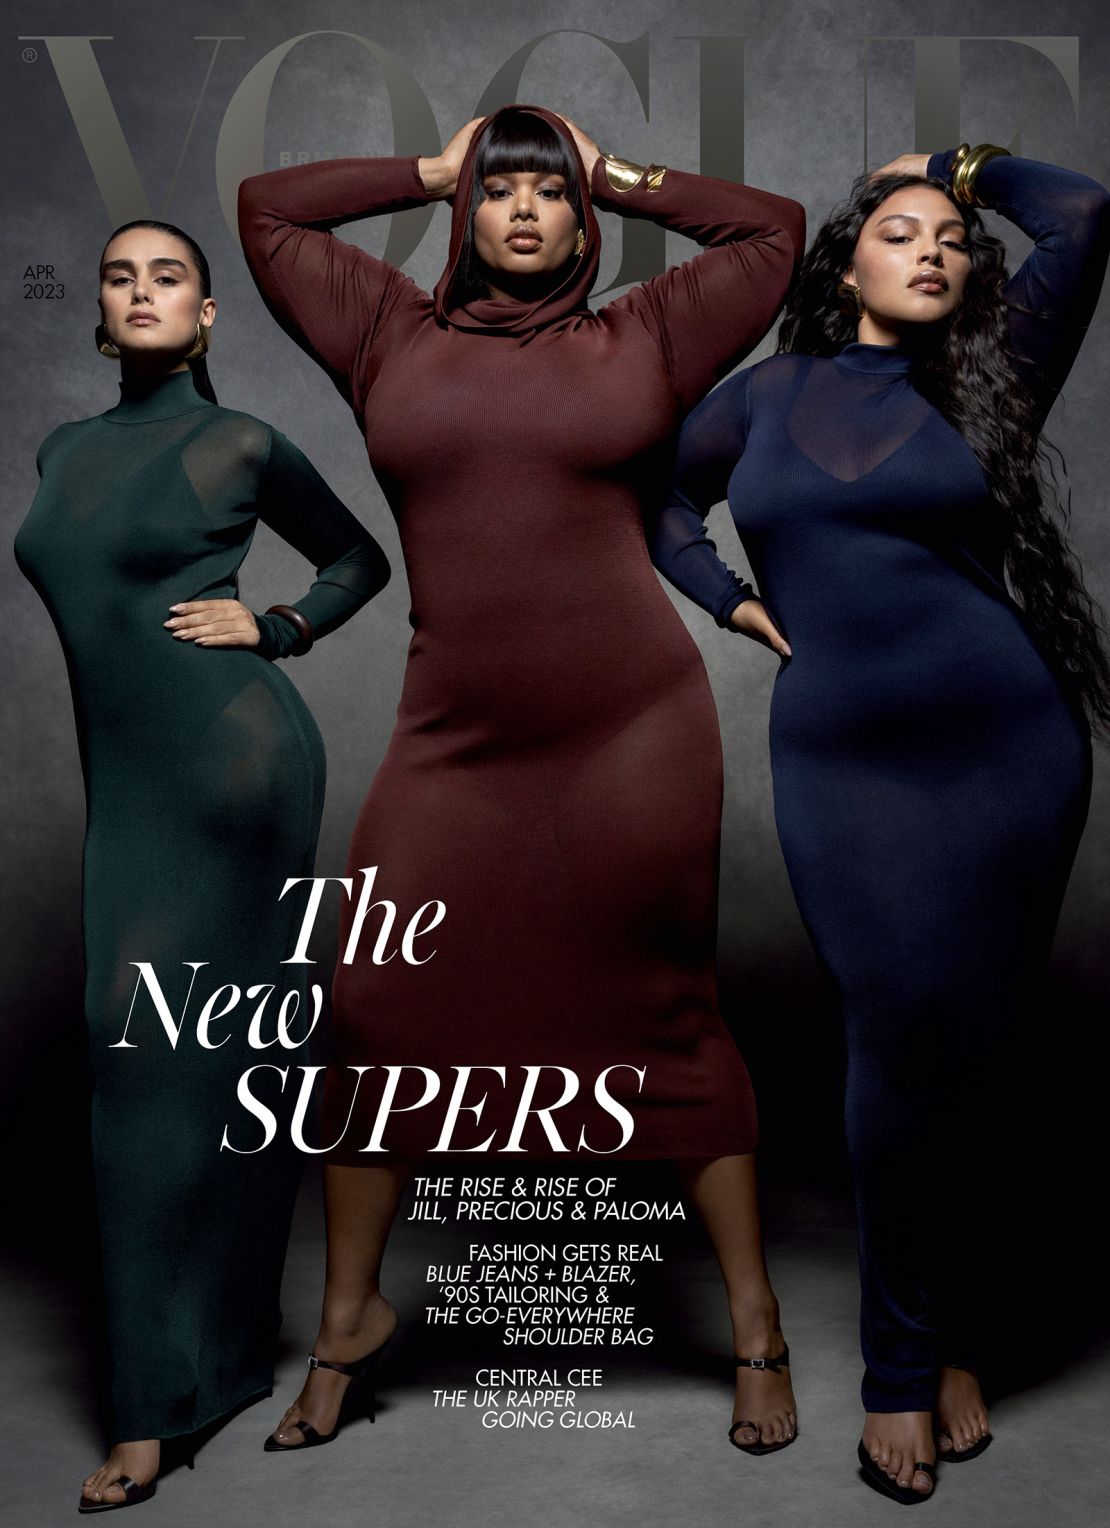 Many fashion experts and stylists seem to believe that a plus size